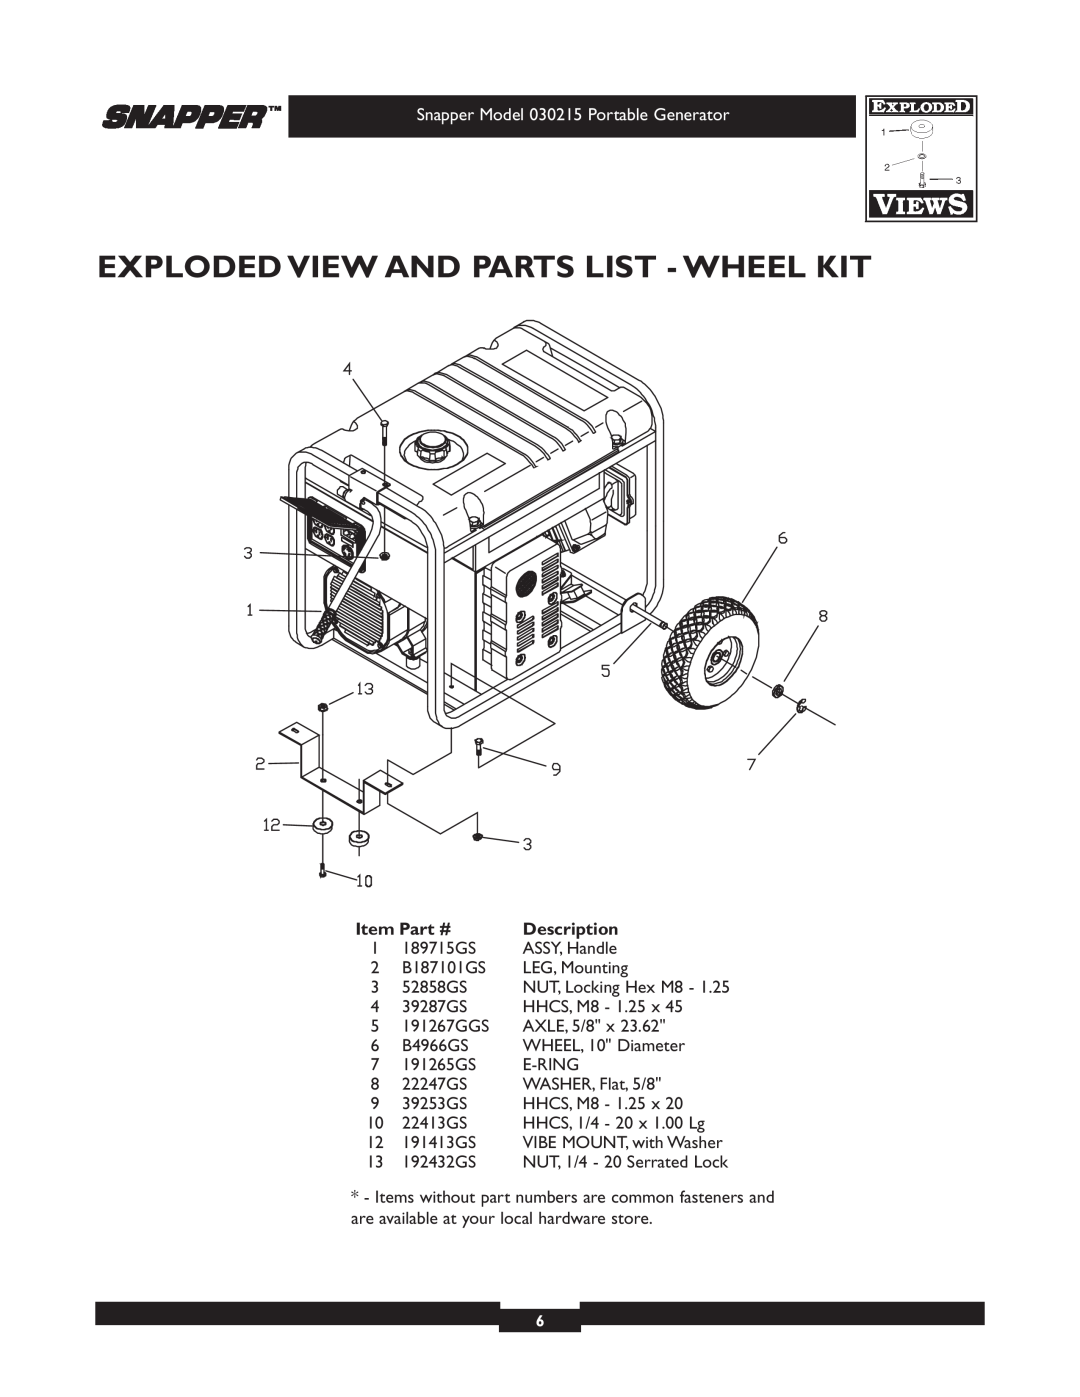 Snapper 5600 manual Exploded View And Parts List - Wheel Kit, Snapper Model 030215 Portable Generator, Description 